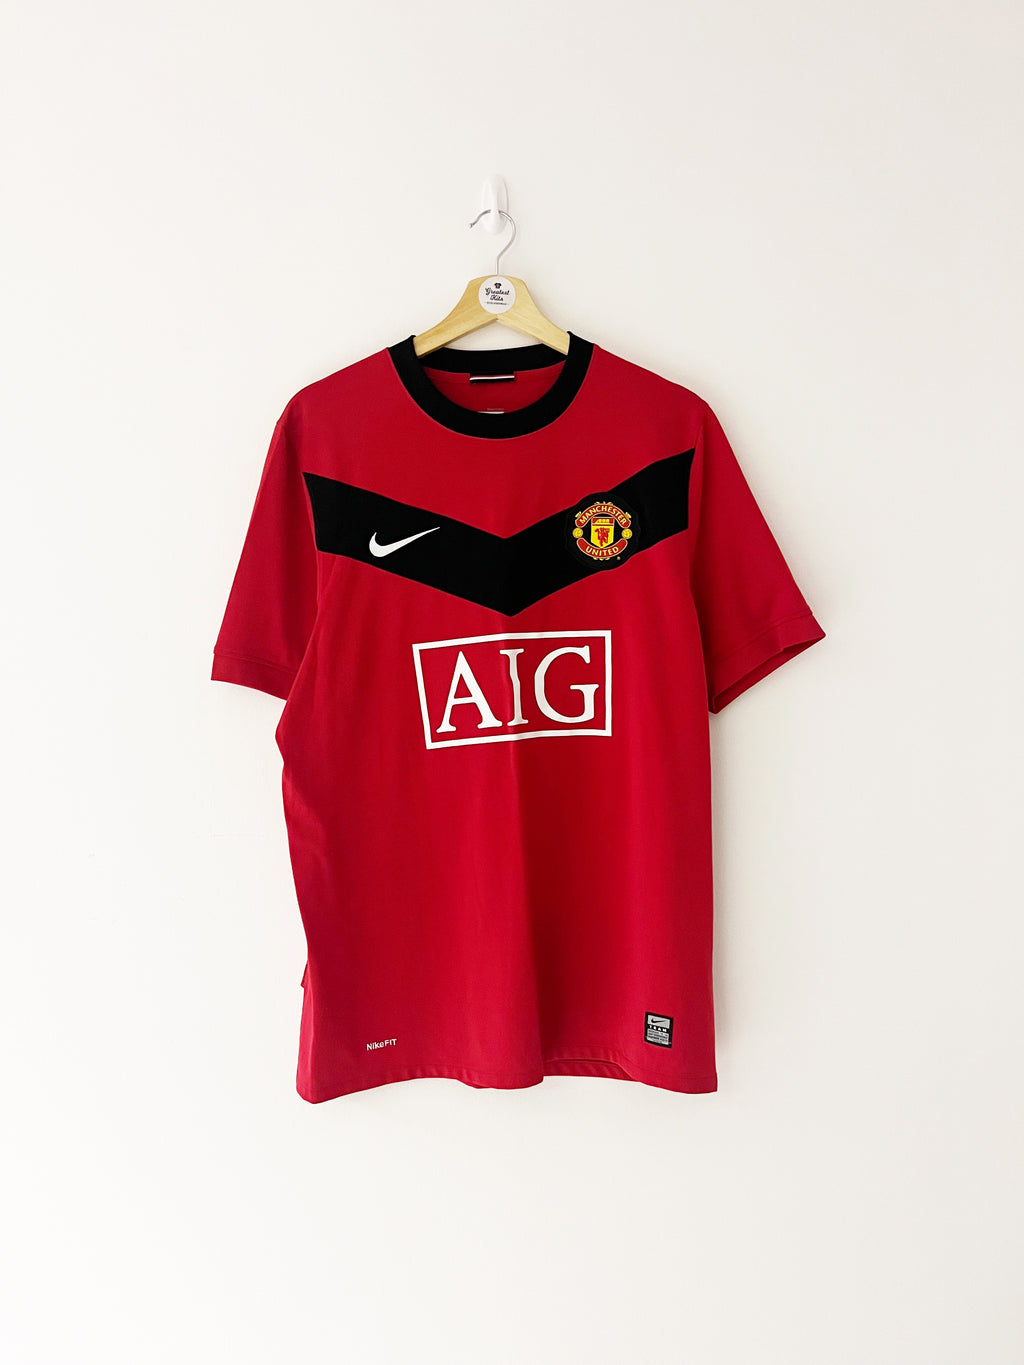 2009/10 Manchester United Home Shirt (M) 9.5/10